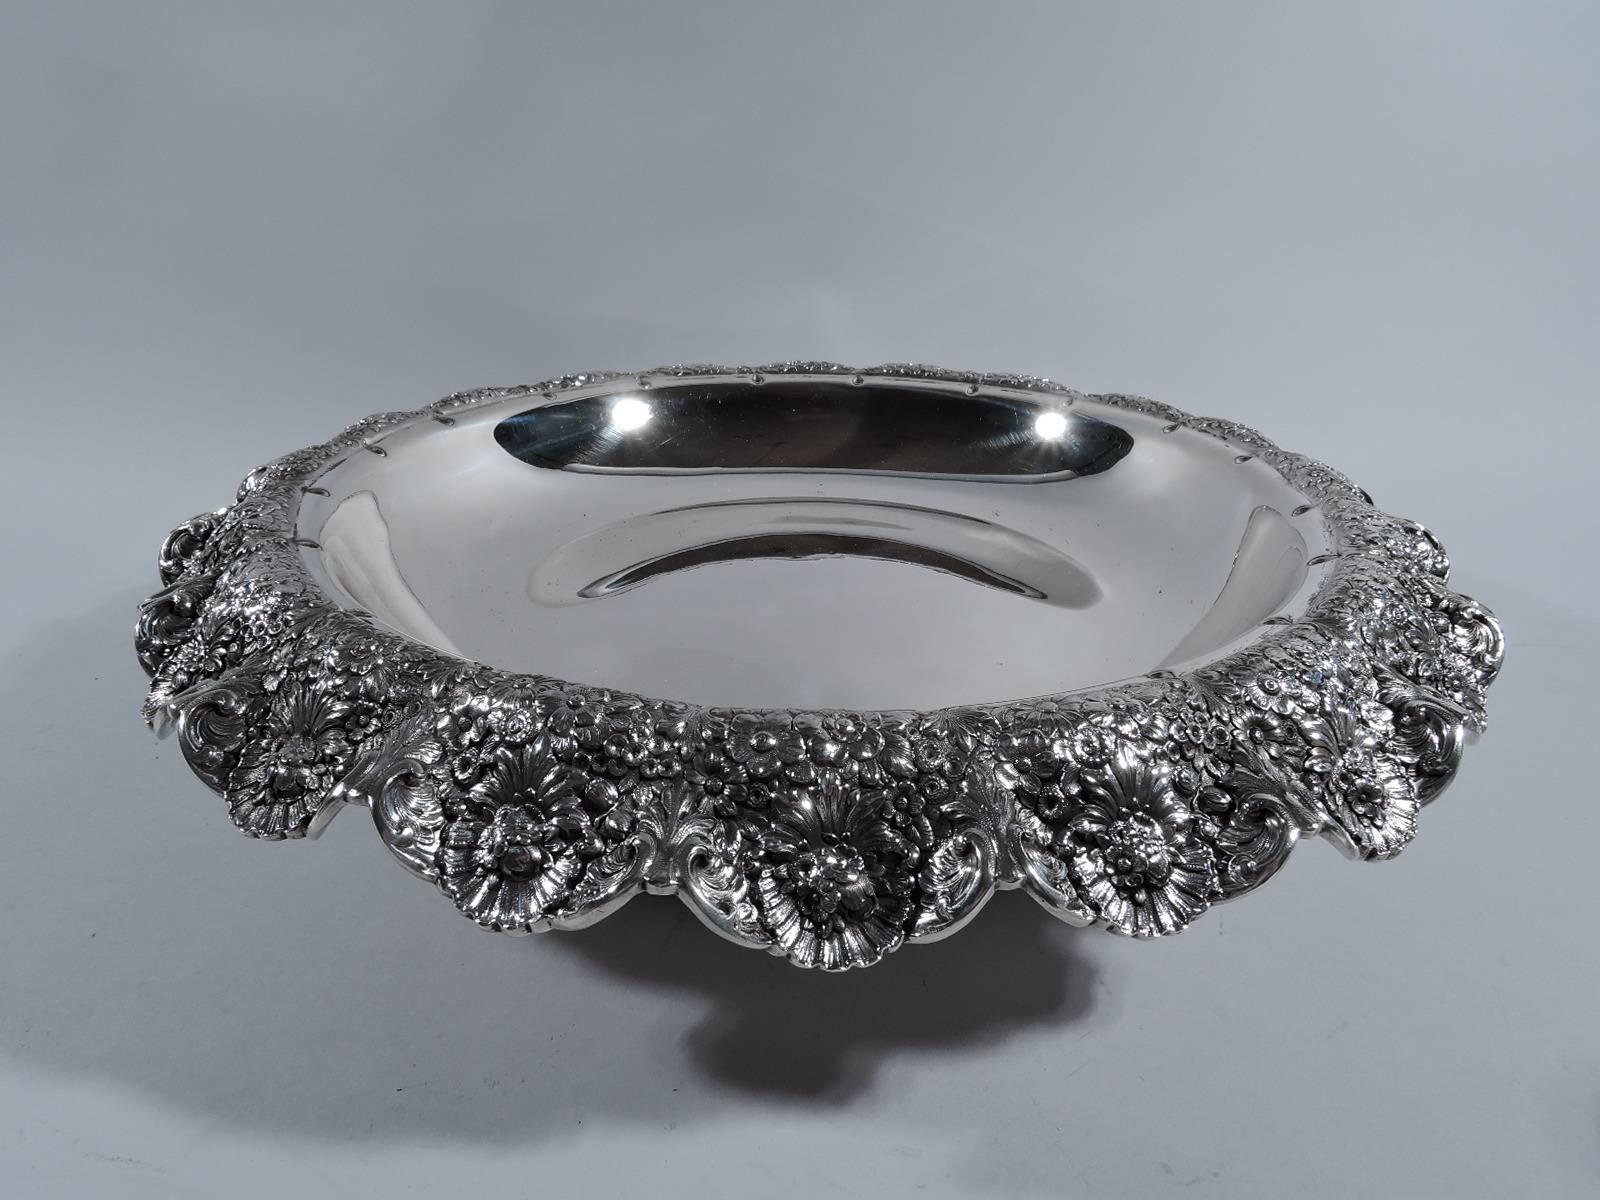 Rare sterling silver centrepiece bowl with wonderful wildflowers. Made by Tiffany & Co. in New York, circa 1894. Shallow bowl on raised foot ring with four leaf-mounted paws. Rim turned down and crimped with dense and overlapping flowers, including